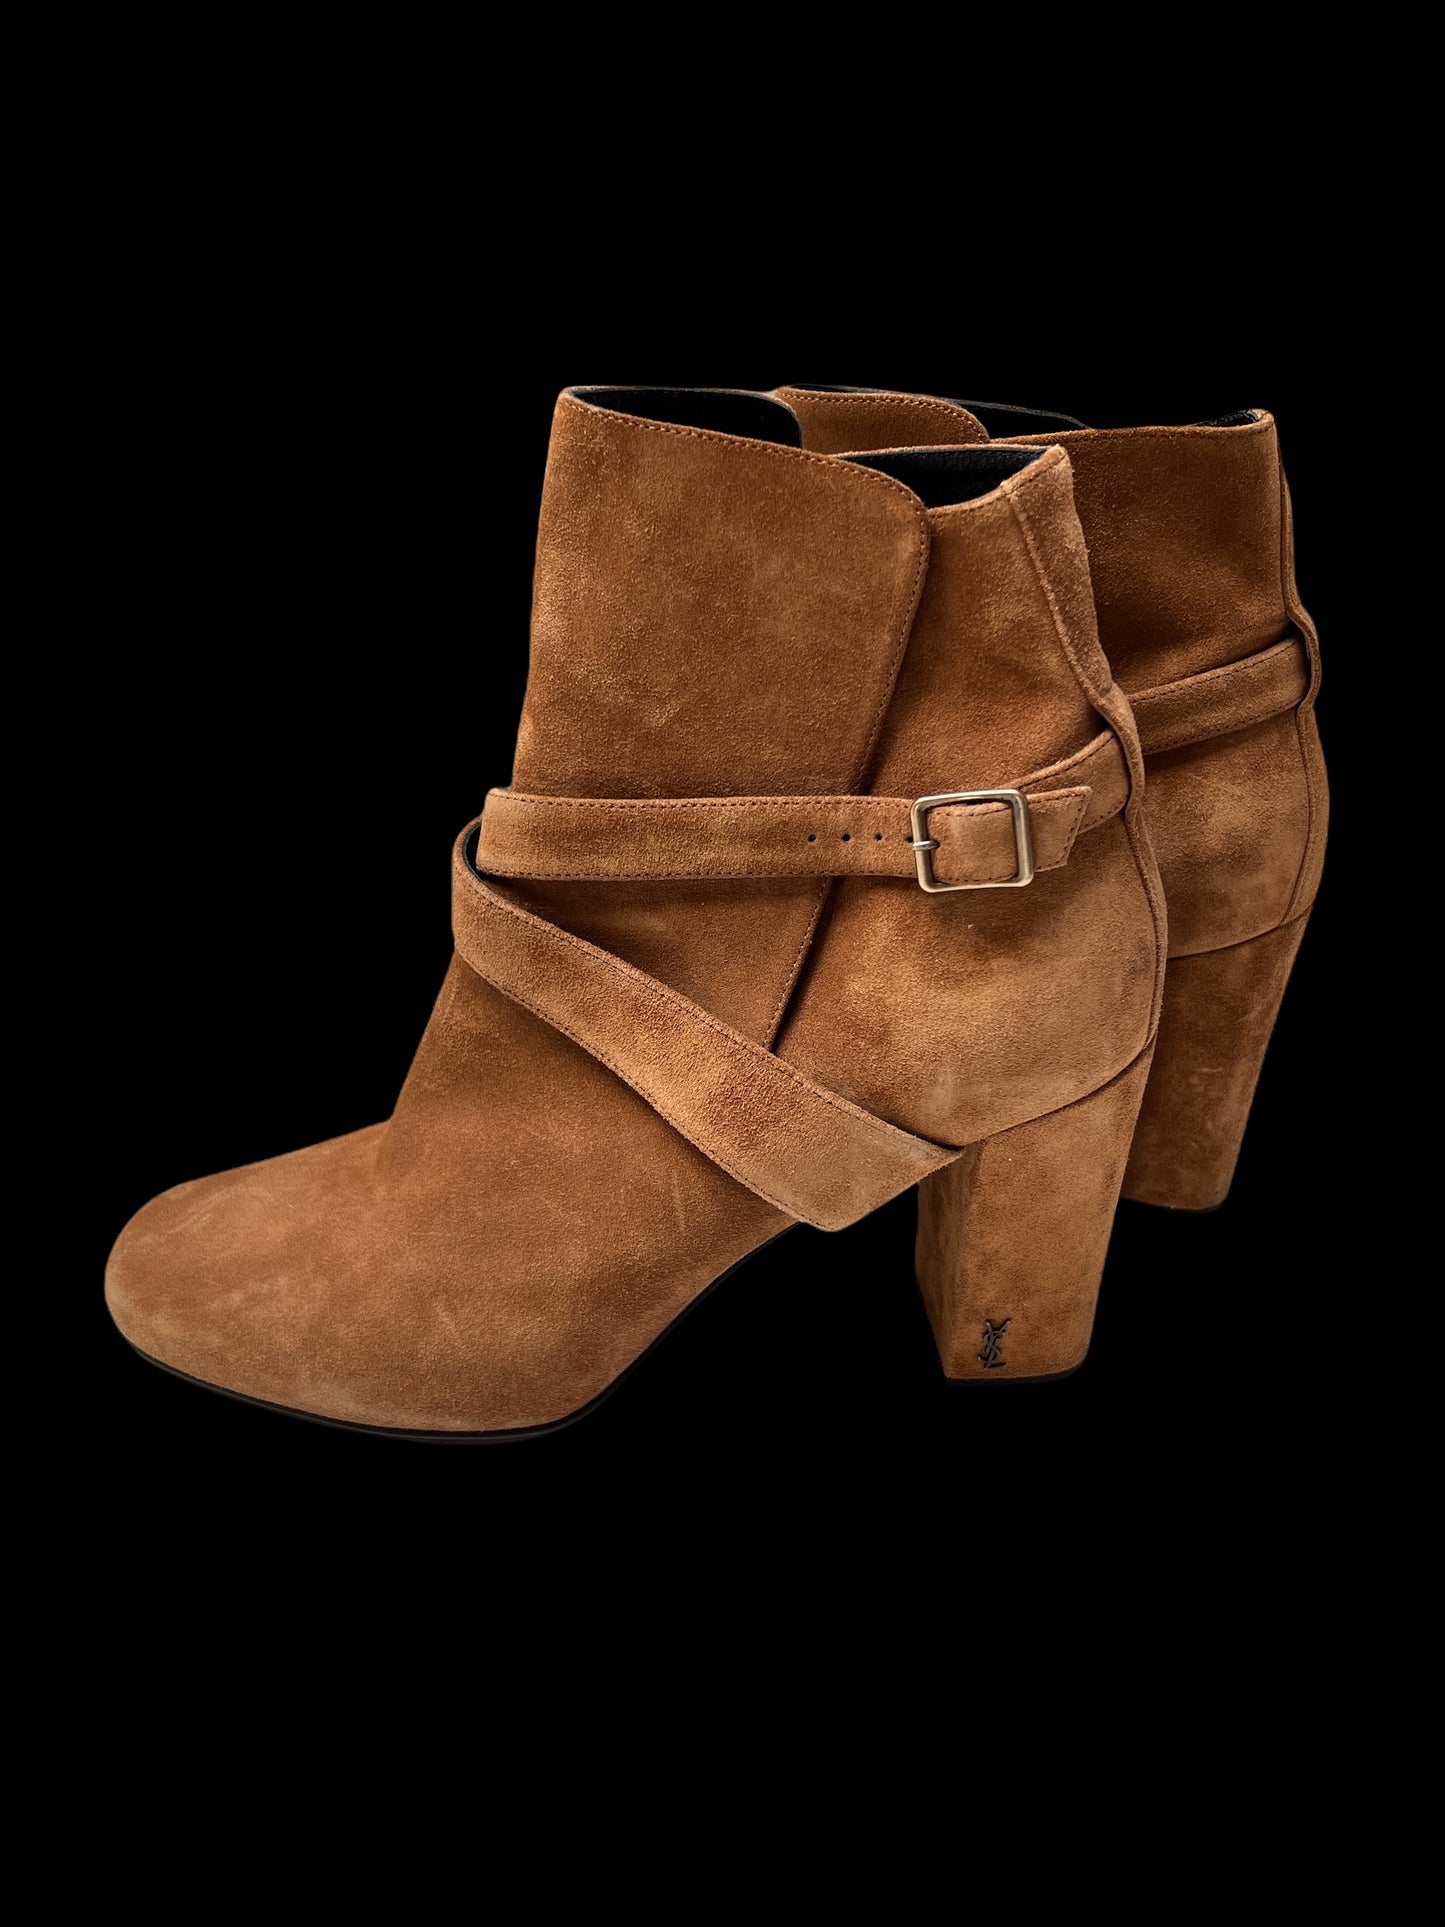 Brown Suede Heeled Boots - 10